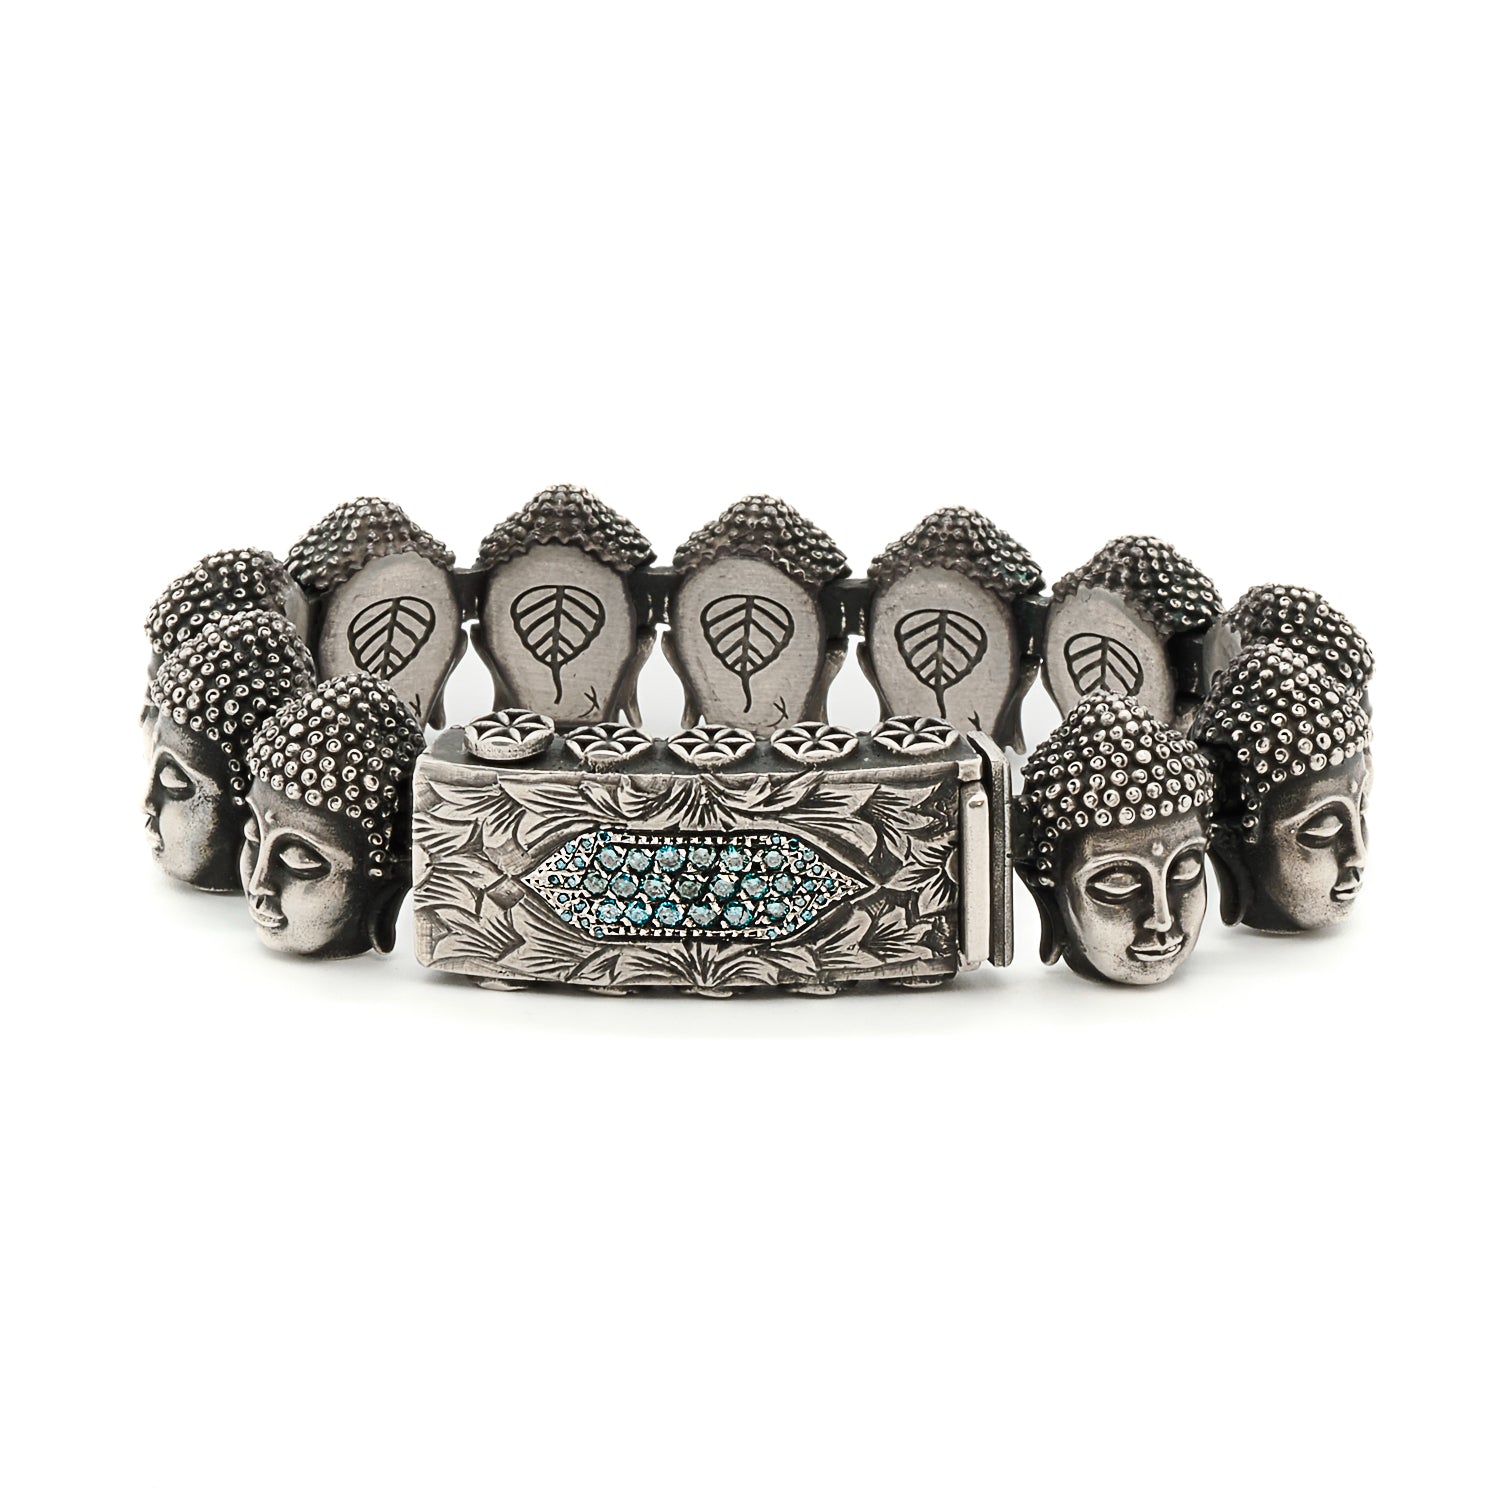 Unique Silver and Diamond Buddha Peace Bracelet - Handcrafted with 0.90 Carat Blue Diamonds.